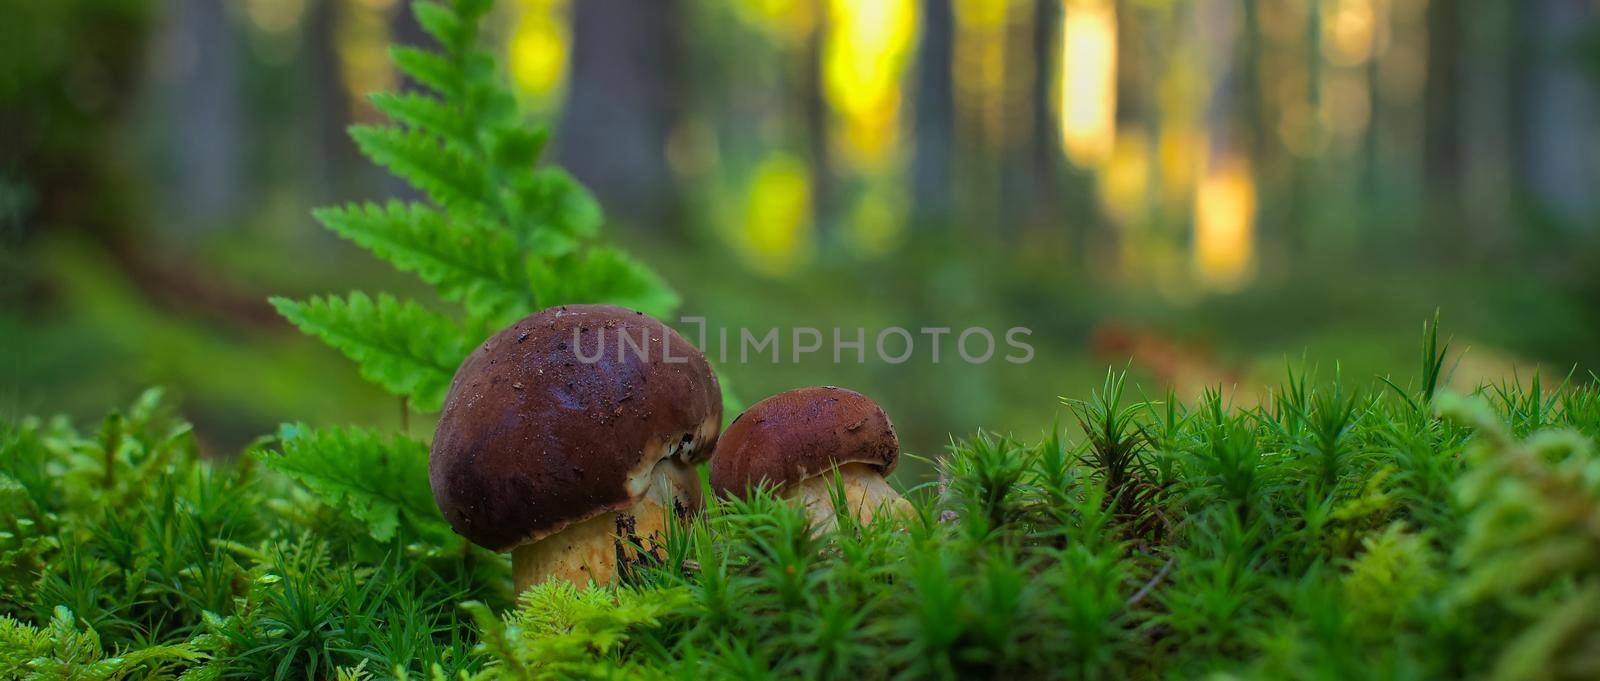 Low angle view of a Cep or Boletus Mushroom growing on lush green moss in a forest between ferns and tree trunks in autumn